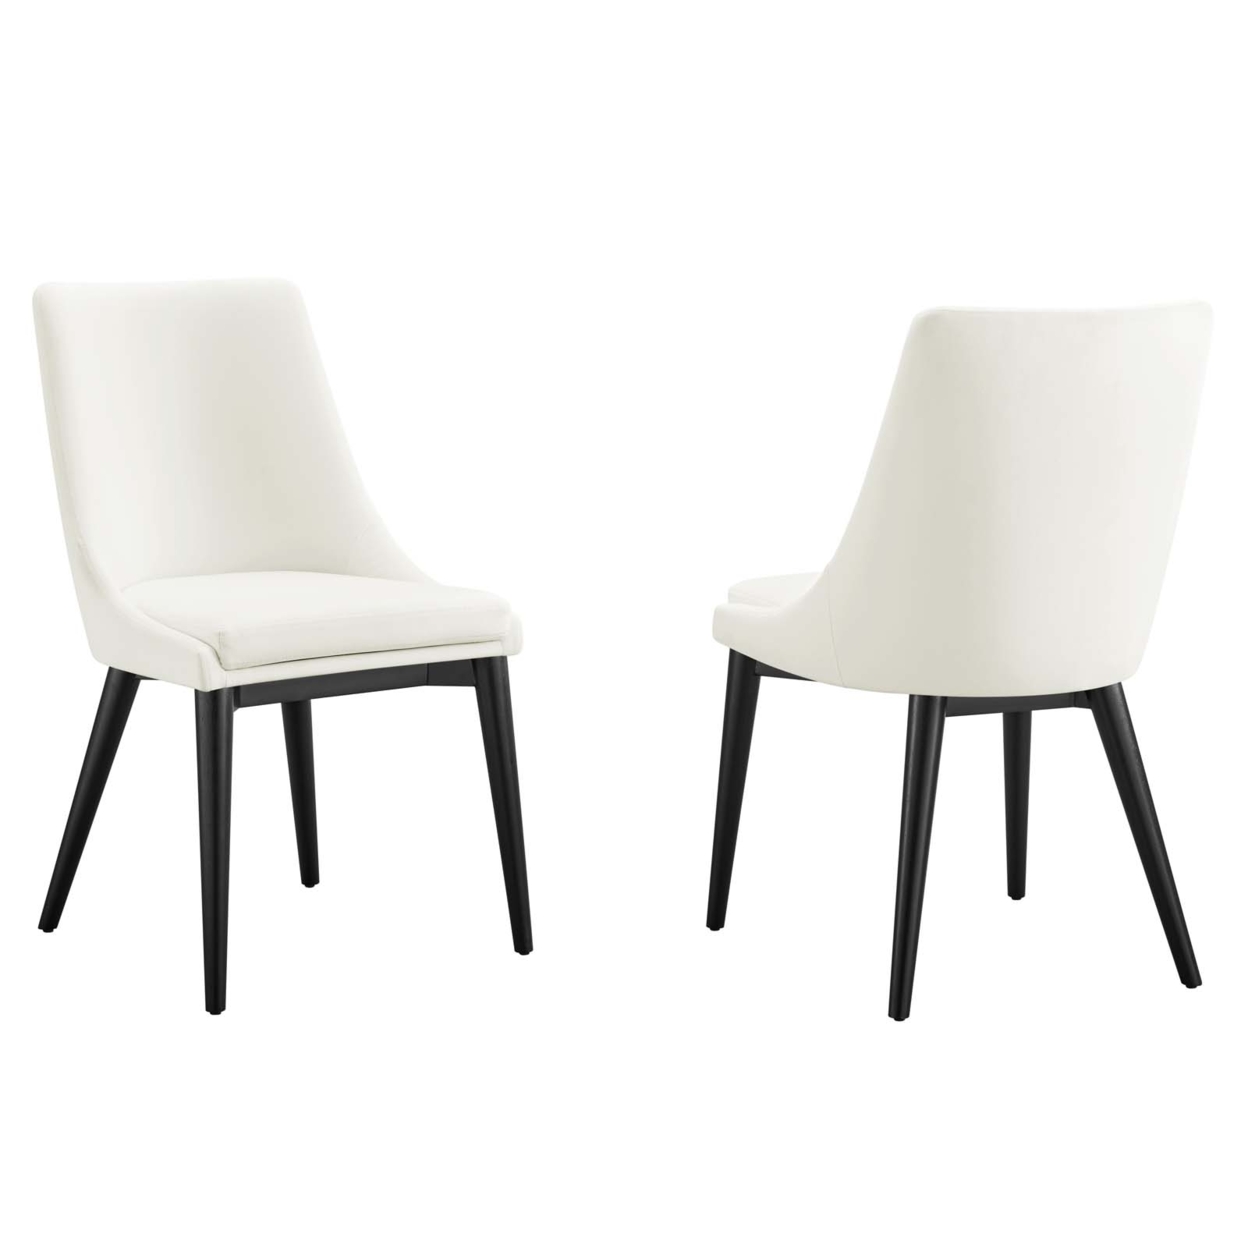 Viscount Accent Performance Velvet Dining Chairs - Set Of 2, White